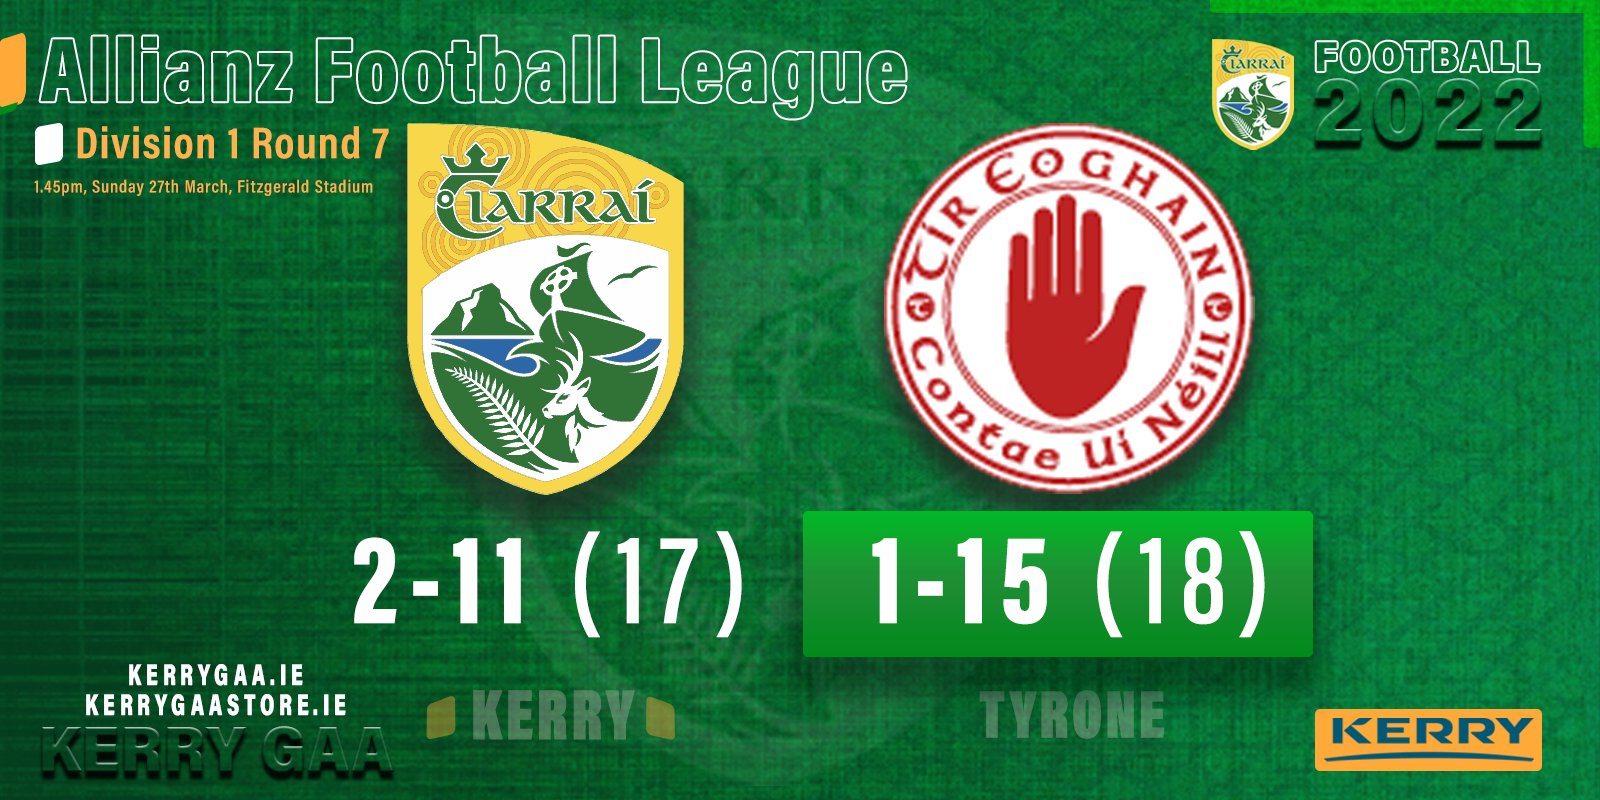 A win for Tyrone in the Allianz Football League – Kerry’s first League defeat